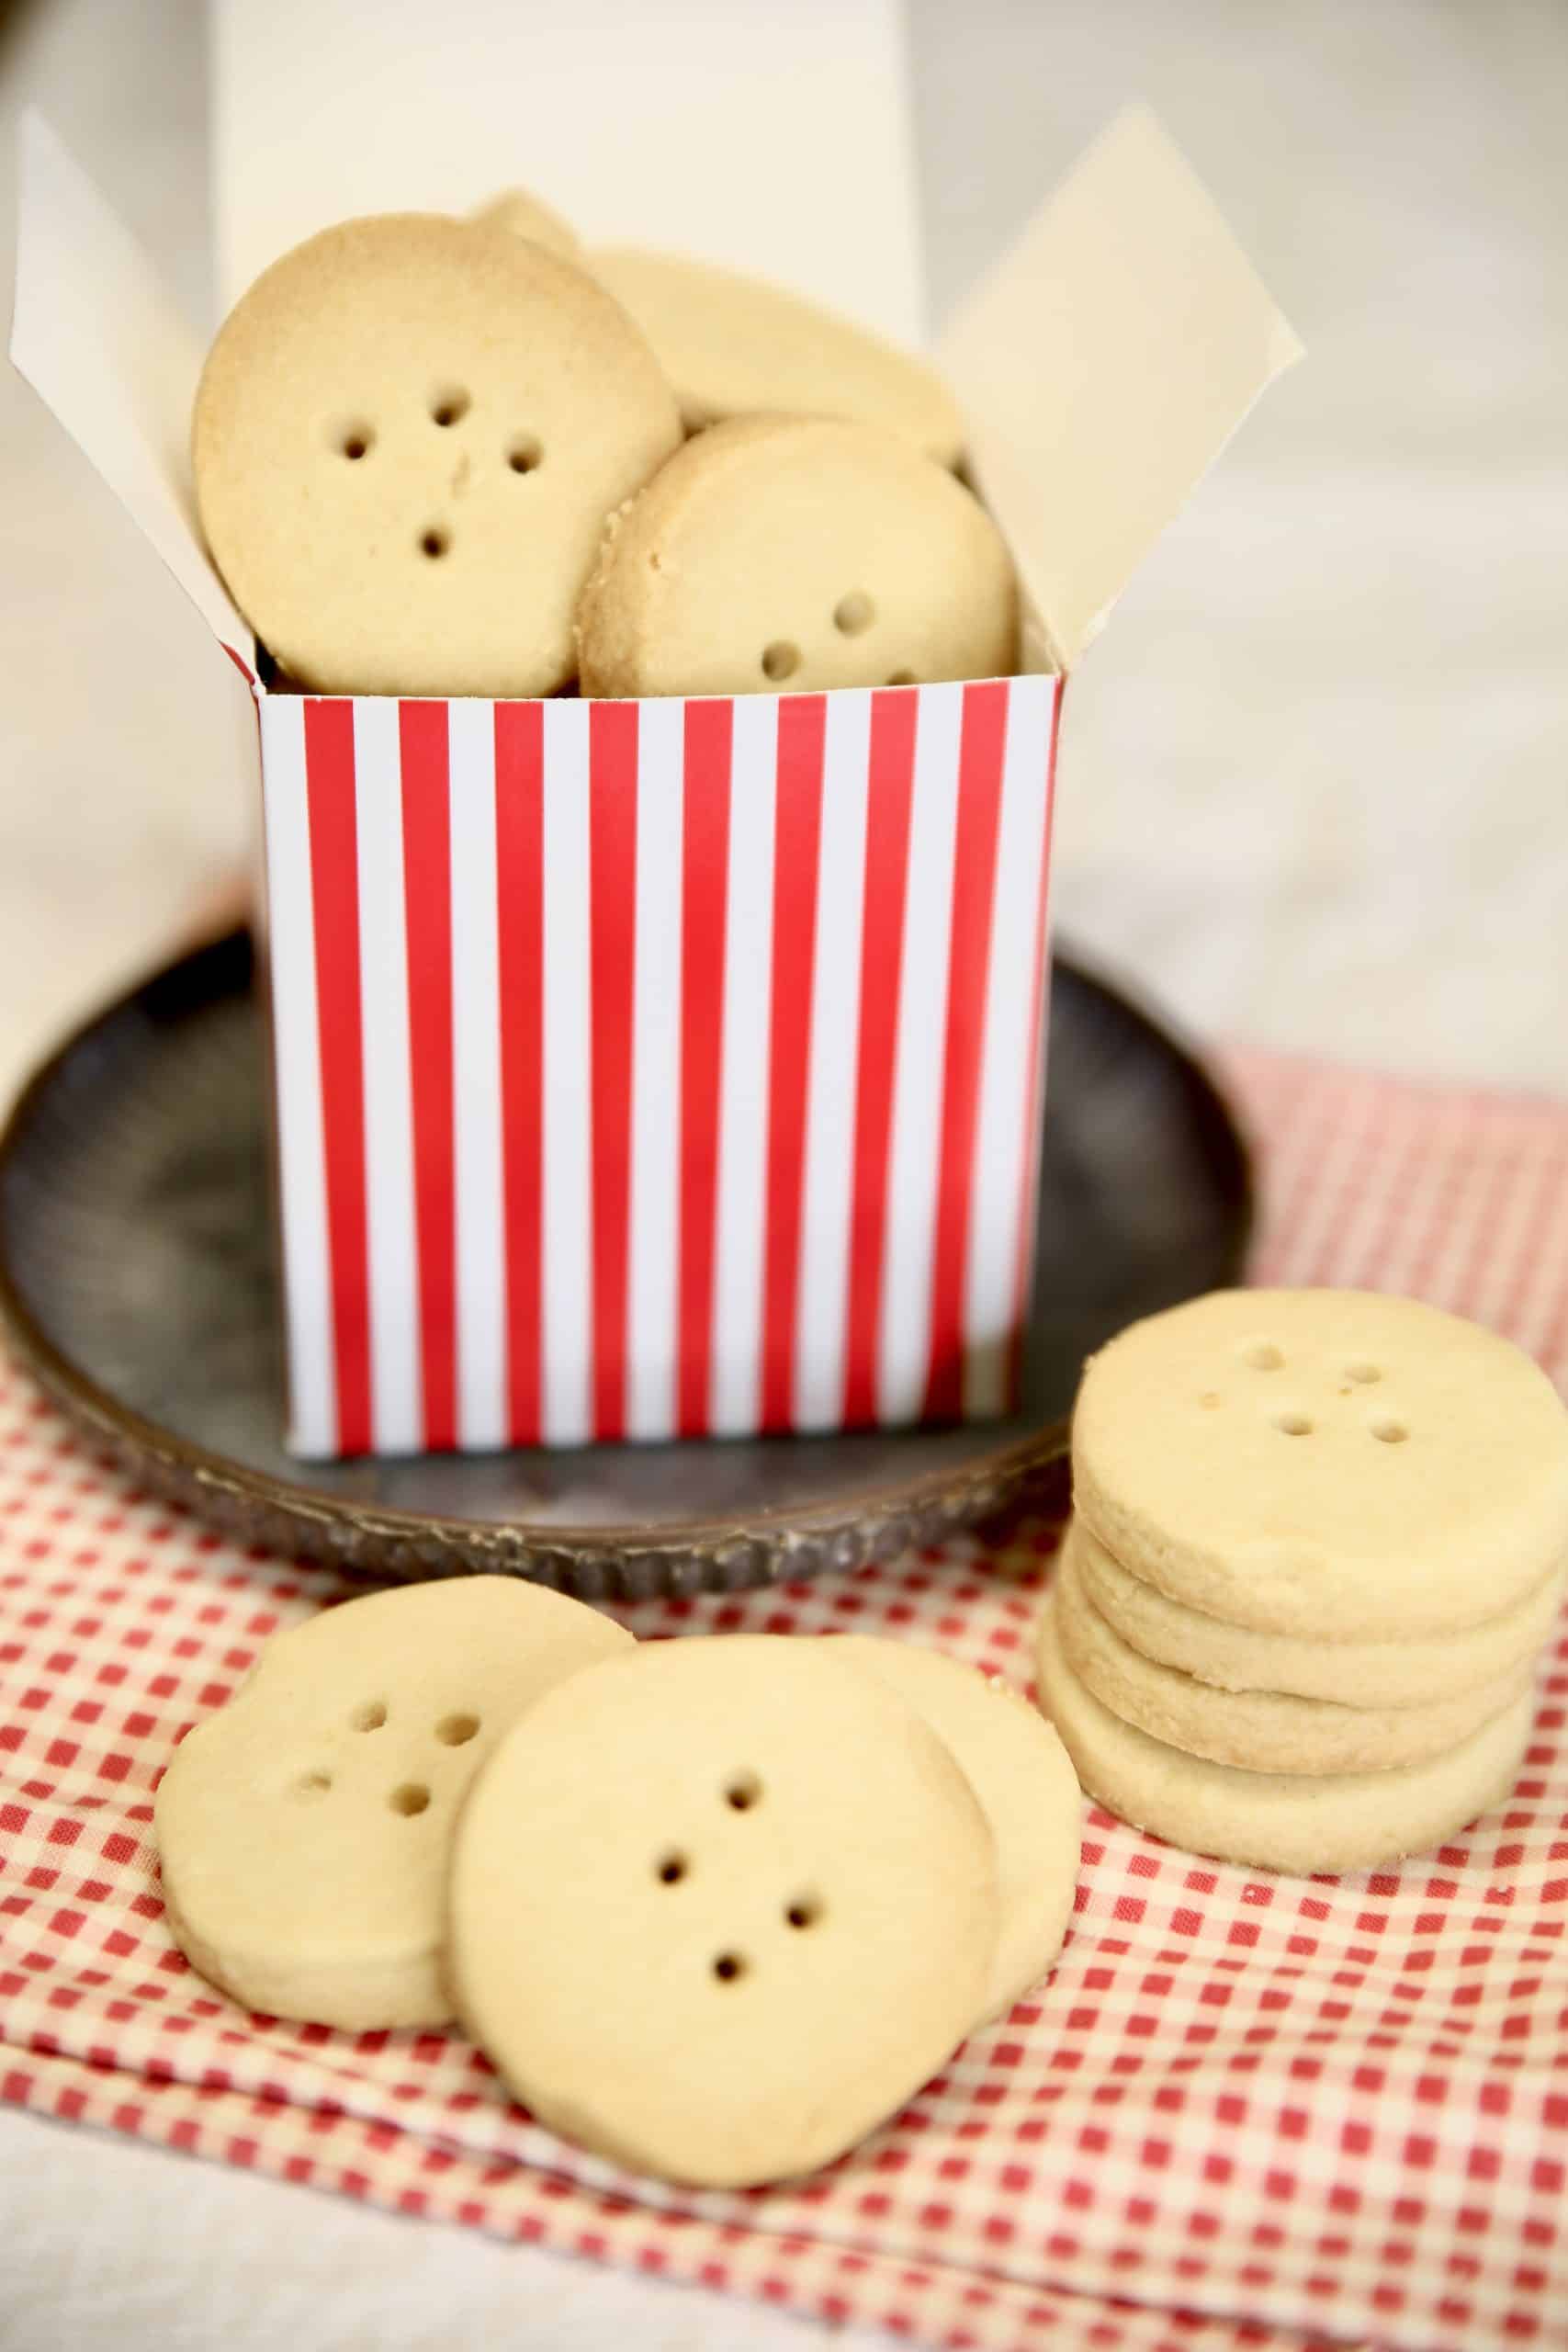 Box of shortbread cookies with cookies on a gingham napkin.